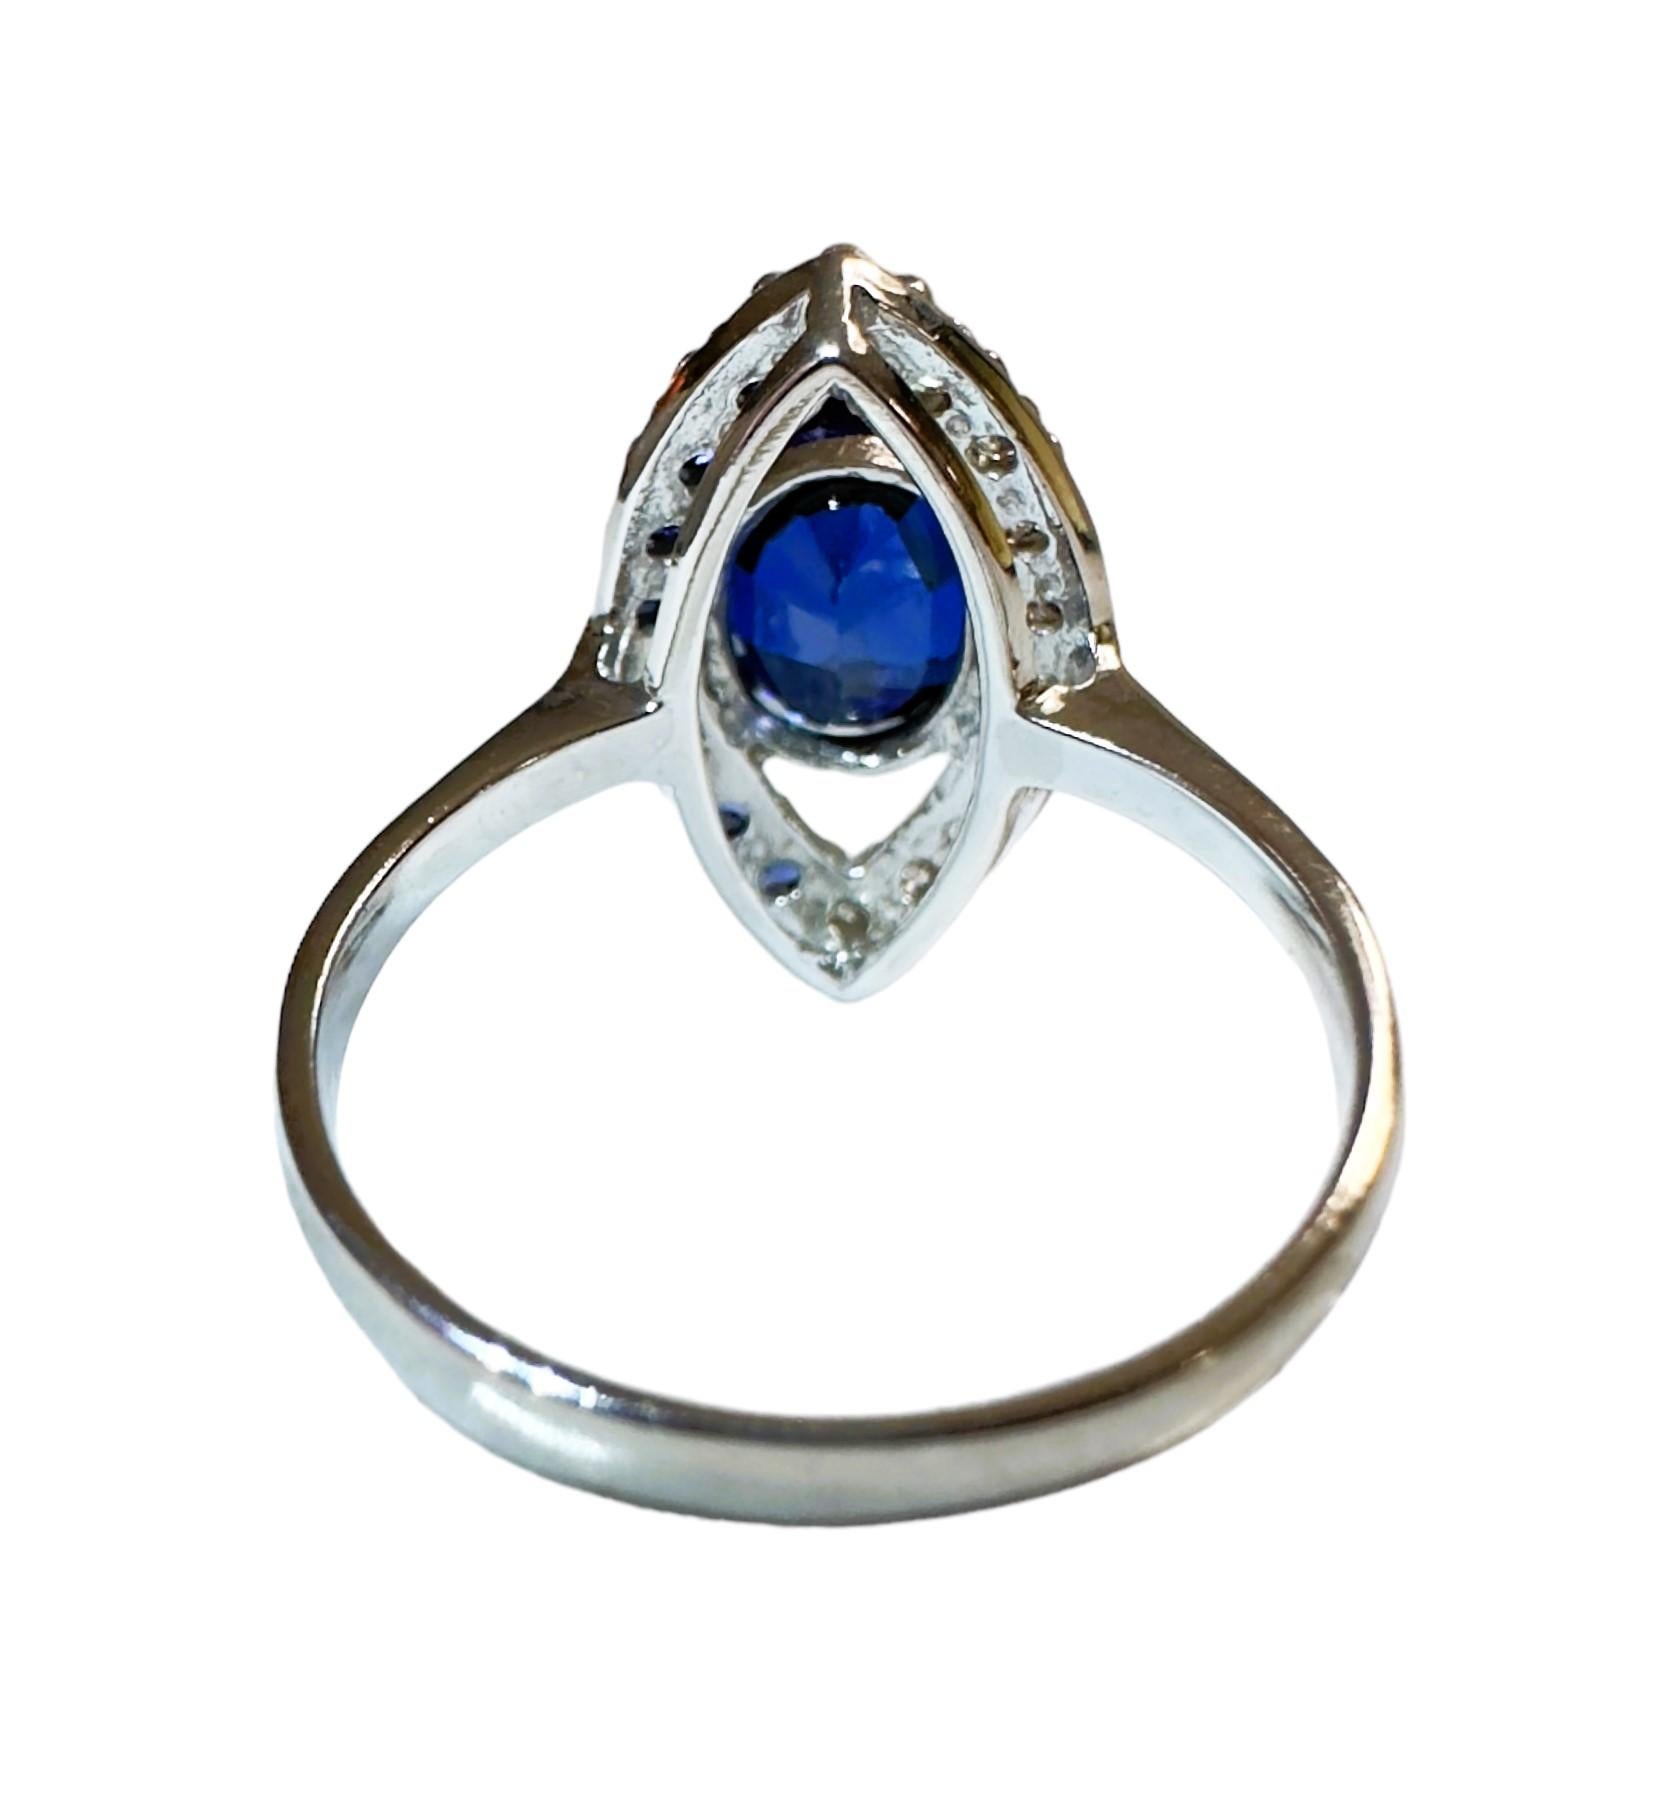 Oval Cut New Handmade African 3.60 Ct Deep Blue Sapphire Sterling Ring Size 6.75 For Sale